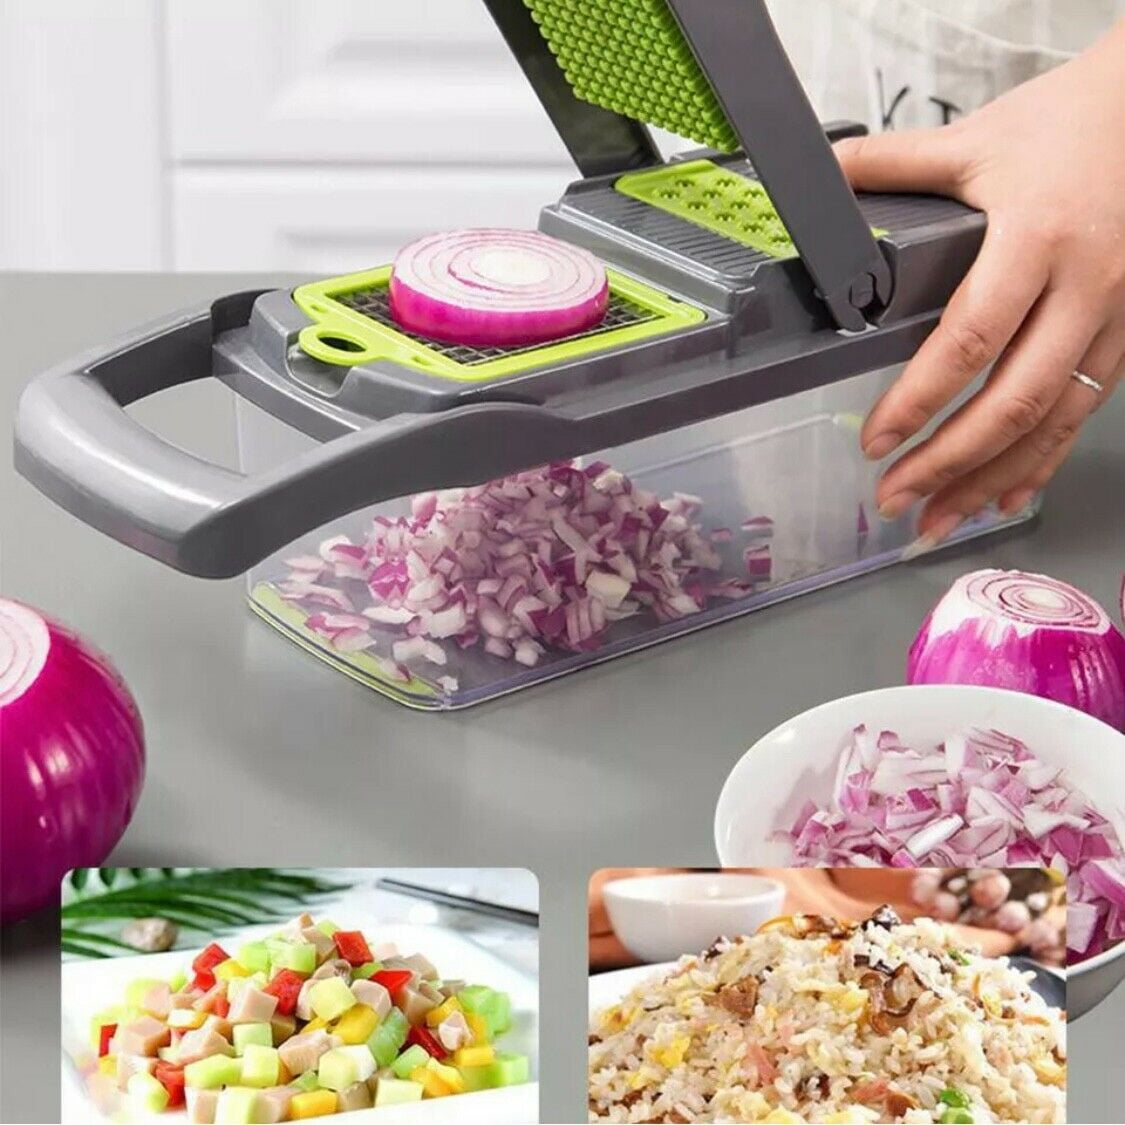  Vegetable Chopper Onion Chopper Dicer 15 in 1 Professional  Mandoline Slicer for Kitchen, Multifunctional Food Chopper Cutter for  Cucumber, Potato, Tomato, Veggie with 11 blades and Filter Basket: Home &  Kitchen